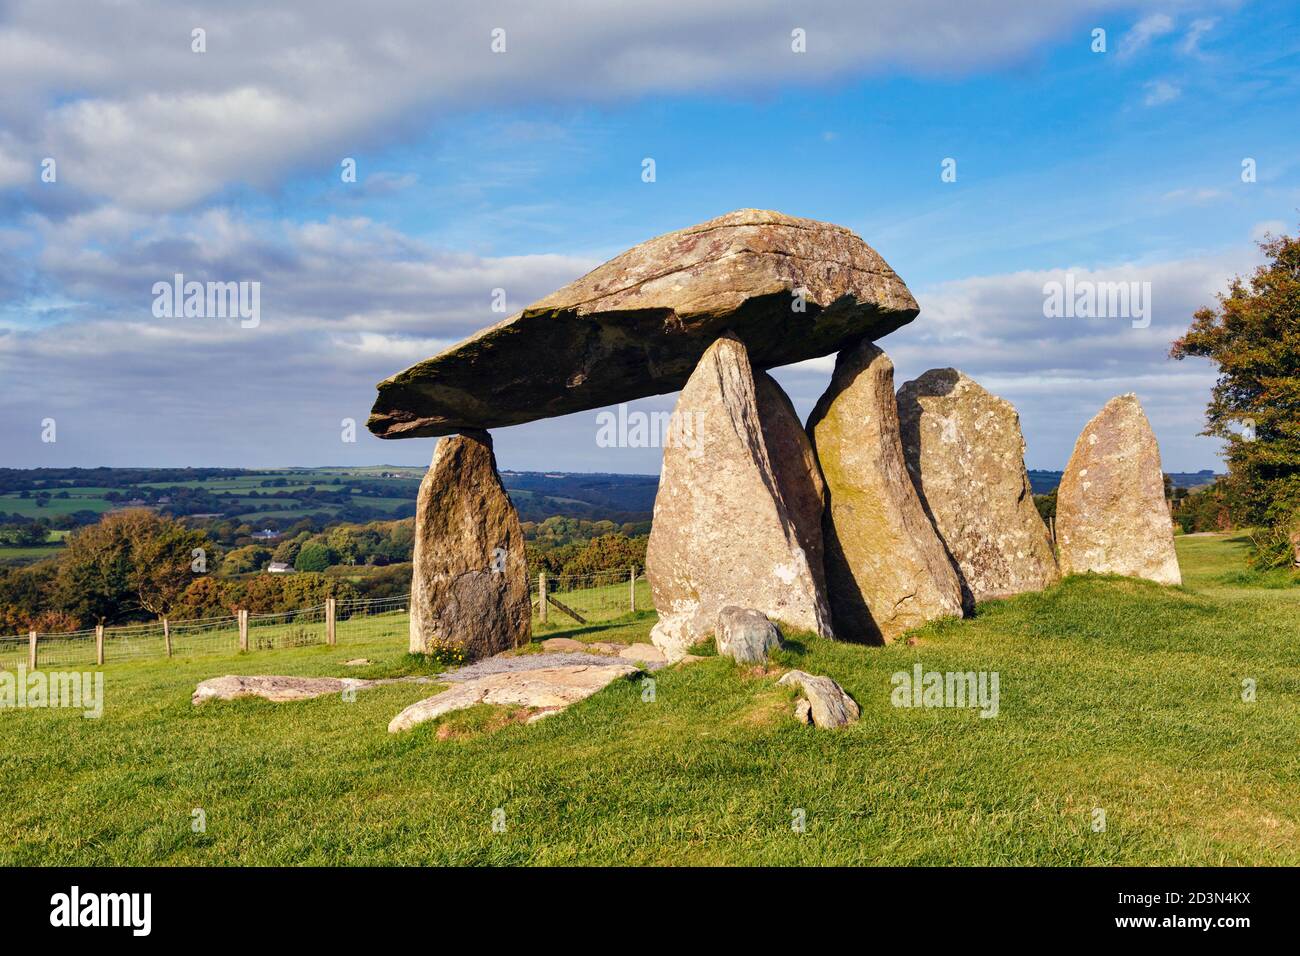 The Pentre Ifan neolithic burial chamber, Pembrokeshire, Wales, United Kingdom.  It is described as being of the 'portal dolmen' type. Stock Photo